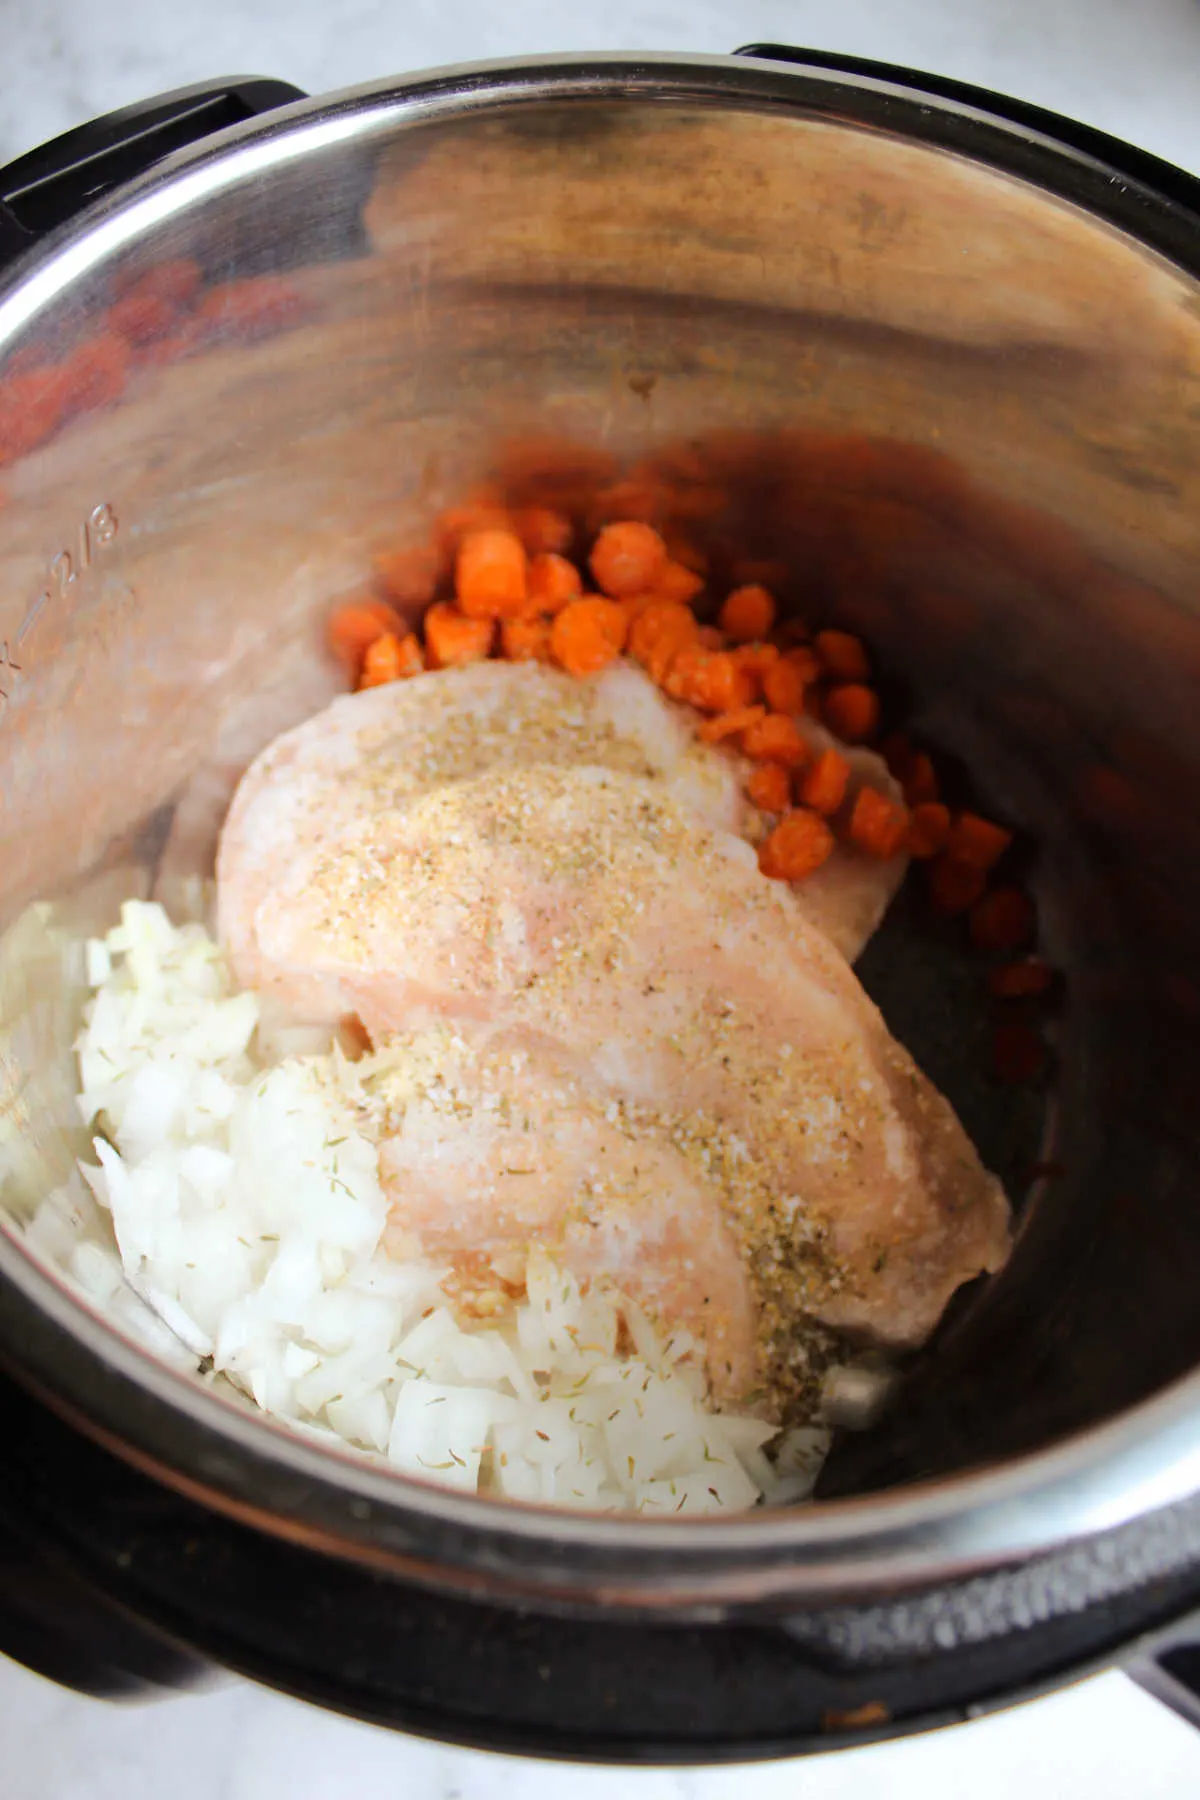 Frozen chicken with diced onion and carrots in instant pot.